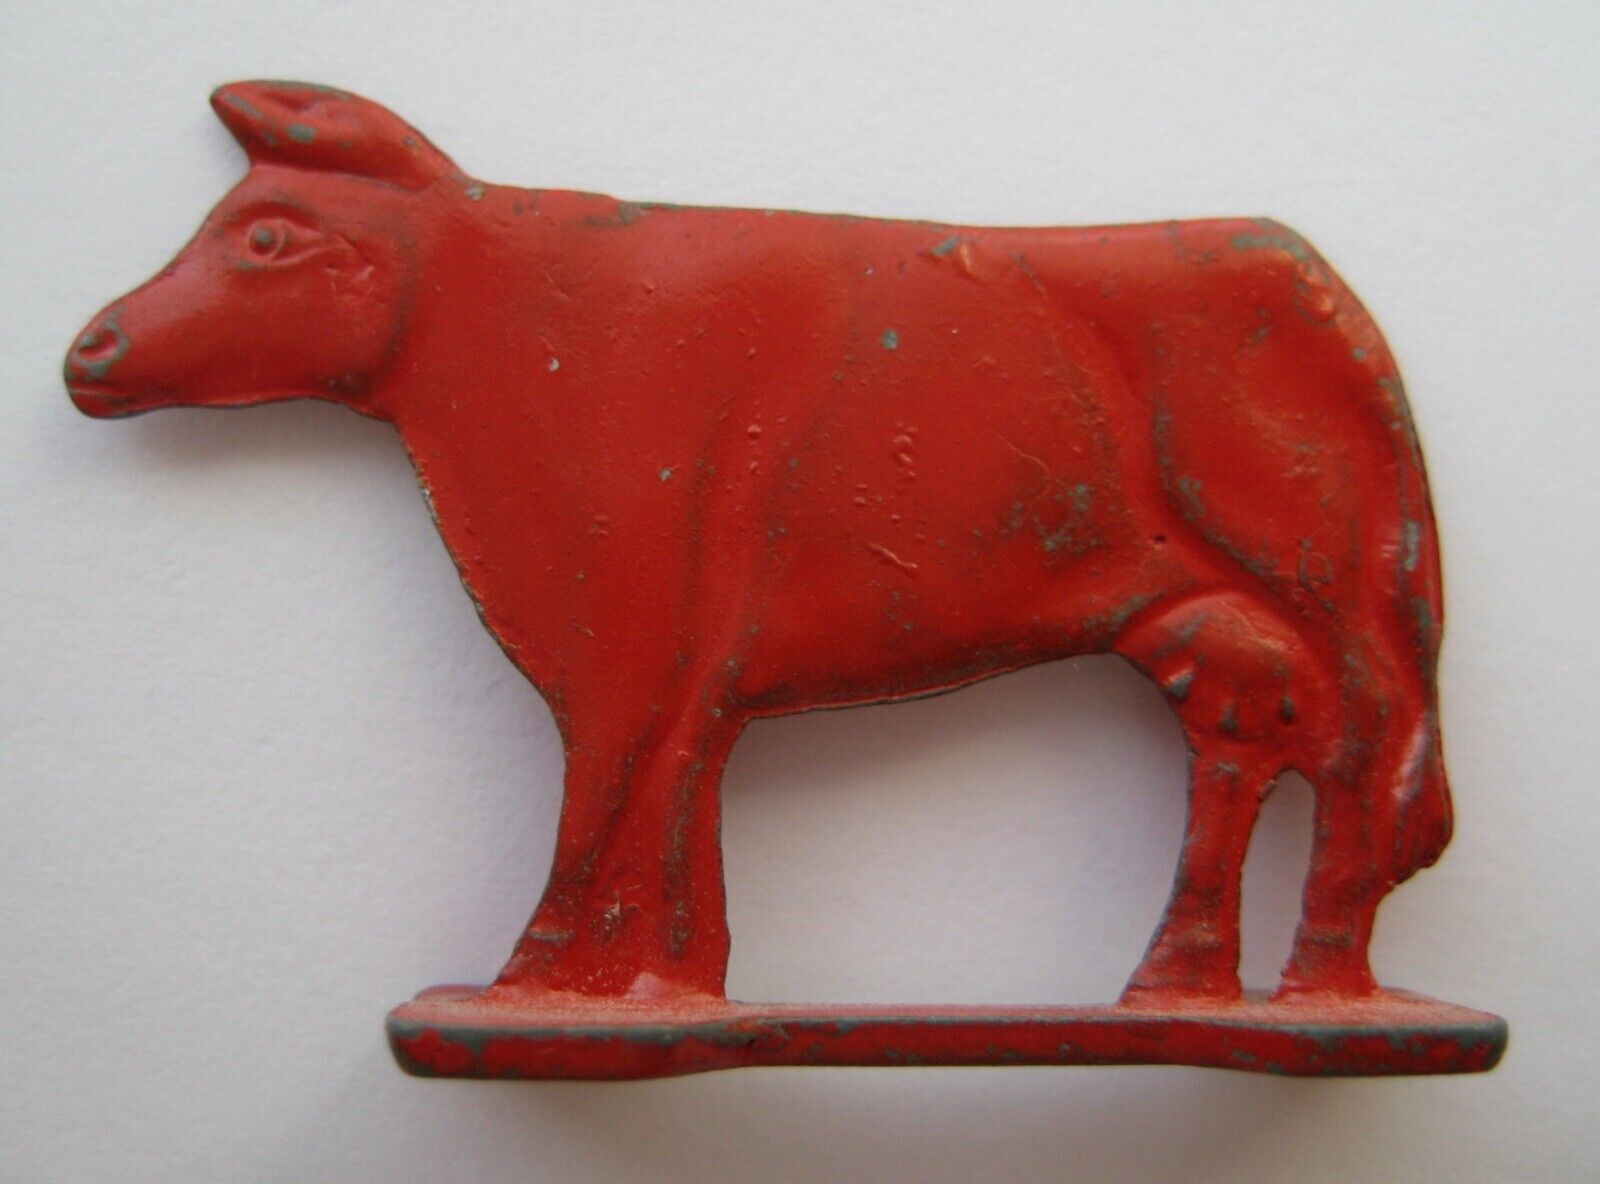 VINTAGE Old Metal FARM COW Stand Up Cracker Jack Toy Prize 1920's-30's